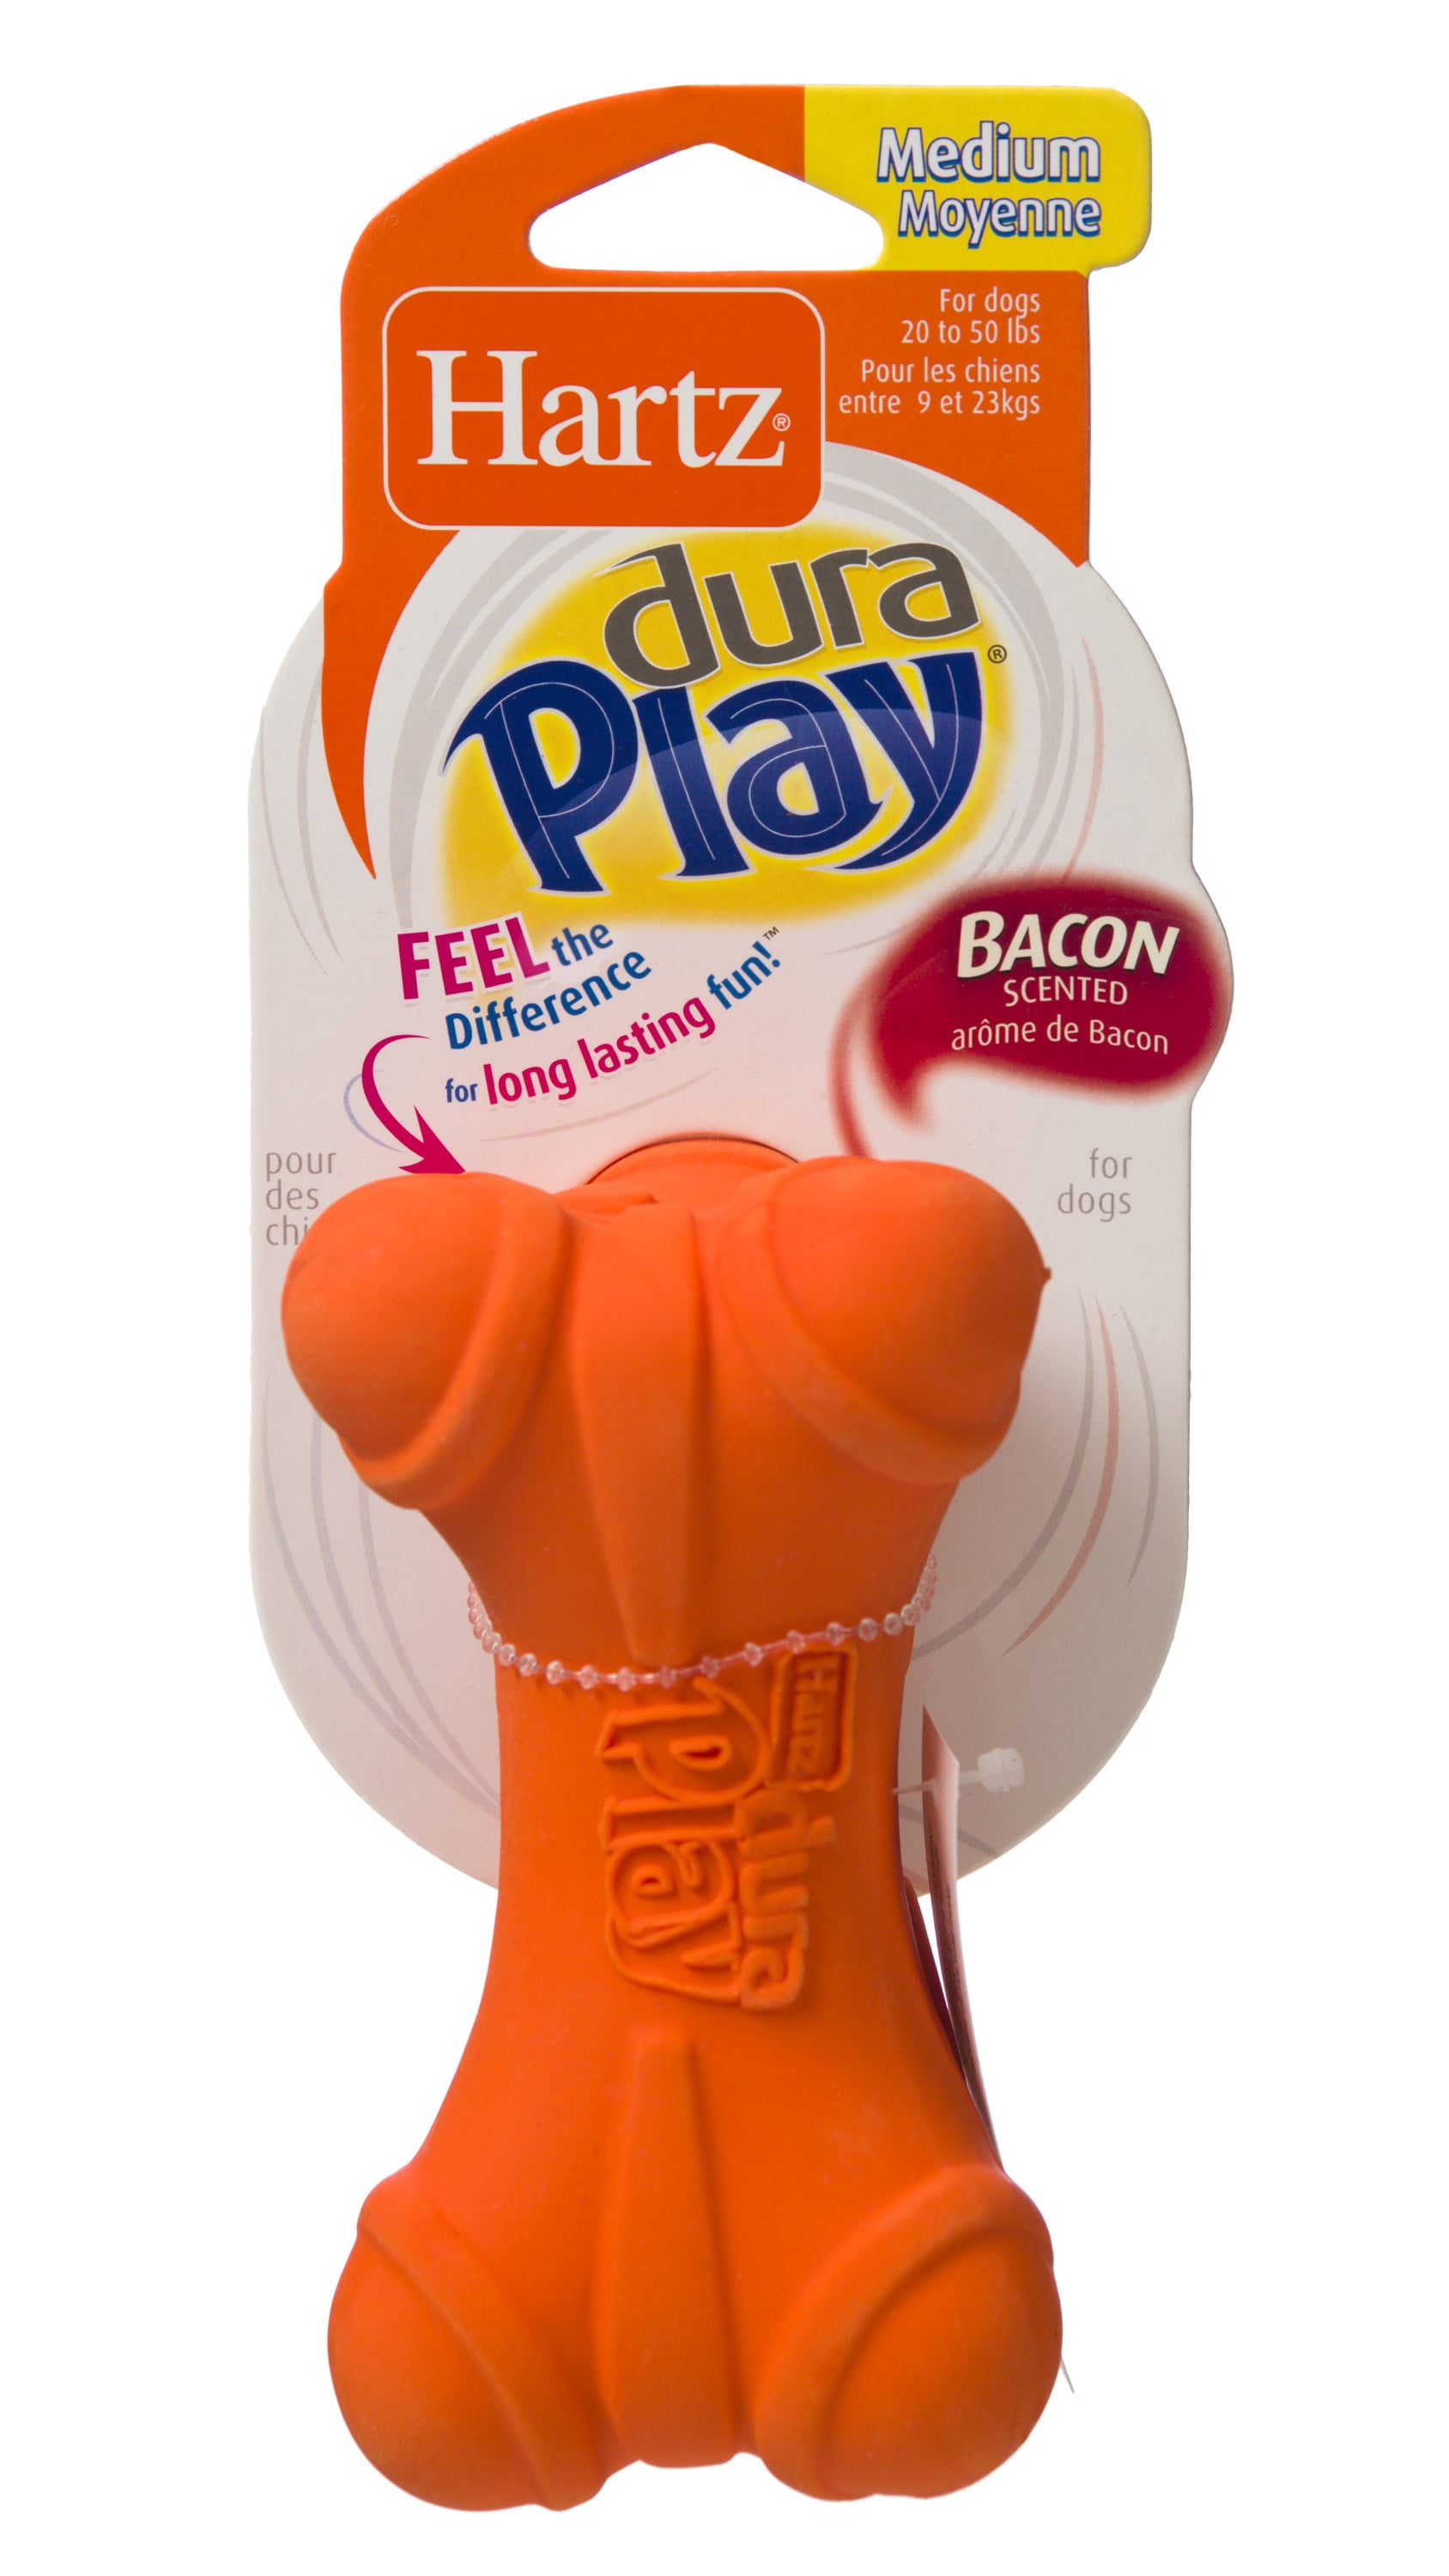 hartz dura play bacon scented dog toy